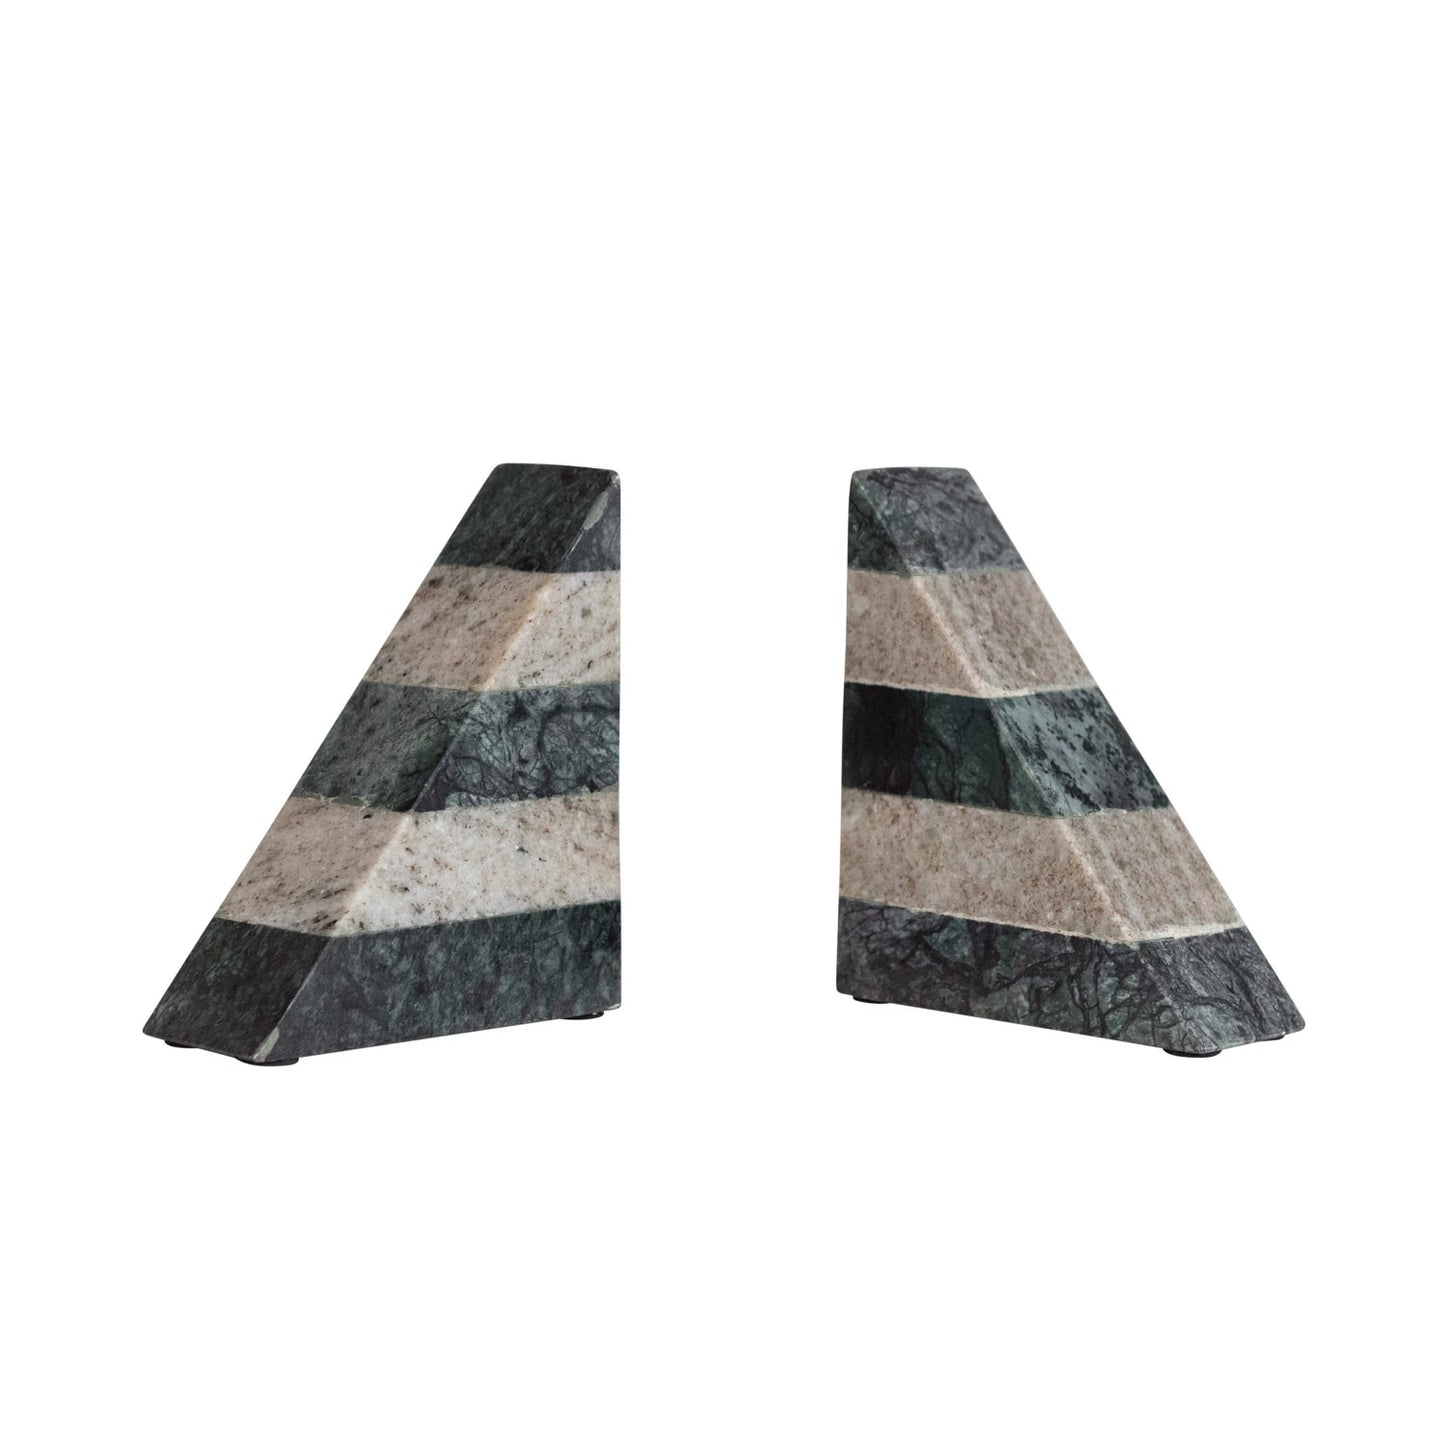 STRIPED MARBLE BOOKENDS